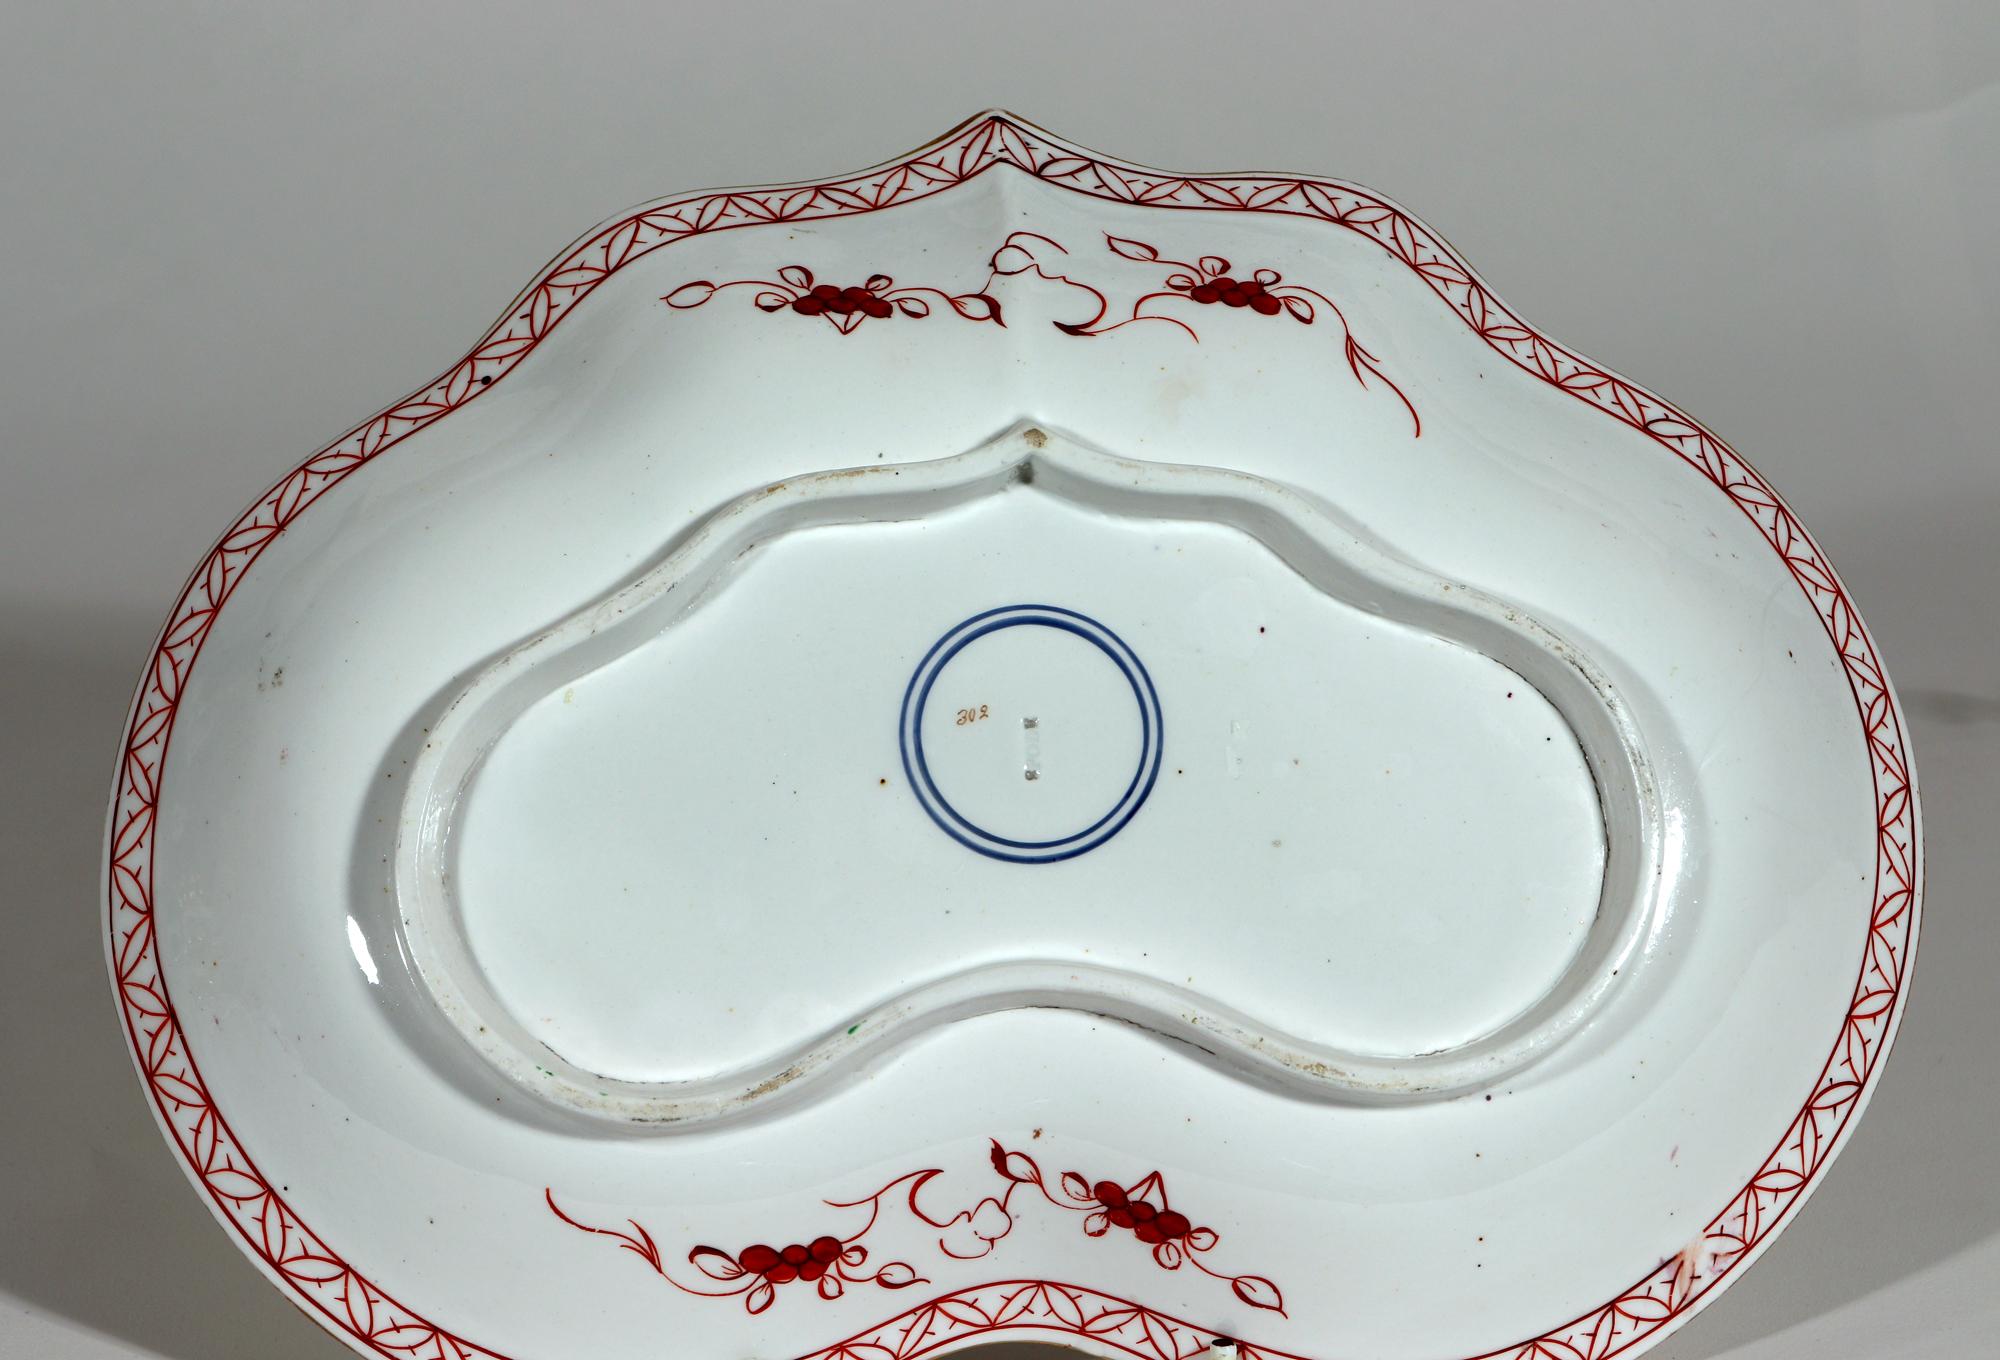 Spode Porcelain dessert service, 
Pattern # 302, 
Thirty-two pieces,
Circa 1800-1810

The Spode porcelain dessert service is numbered 302 mostly in gold. The pattern is very charming and rather unusual. The centers of each piece is painted with